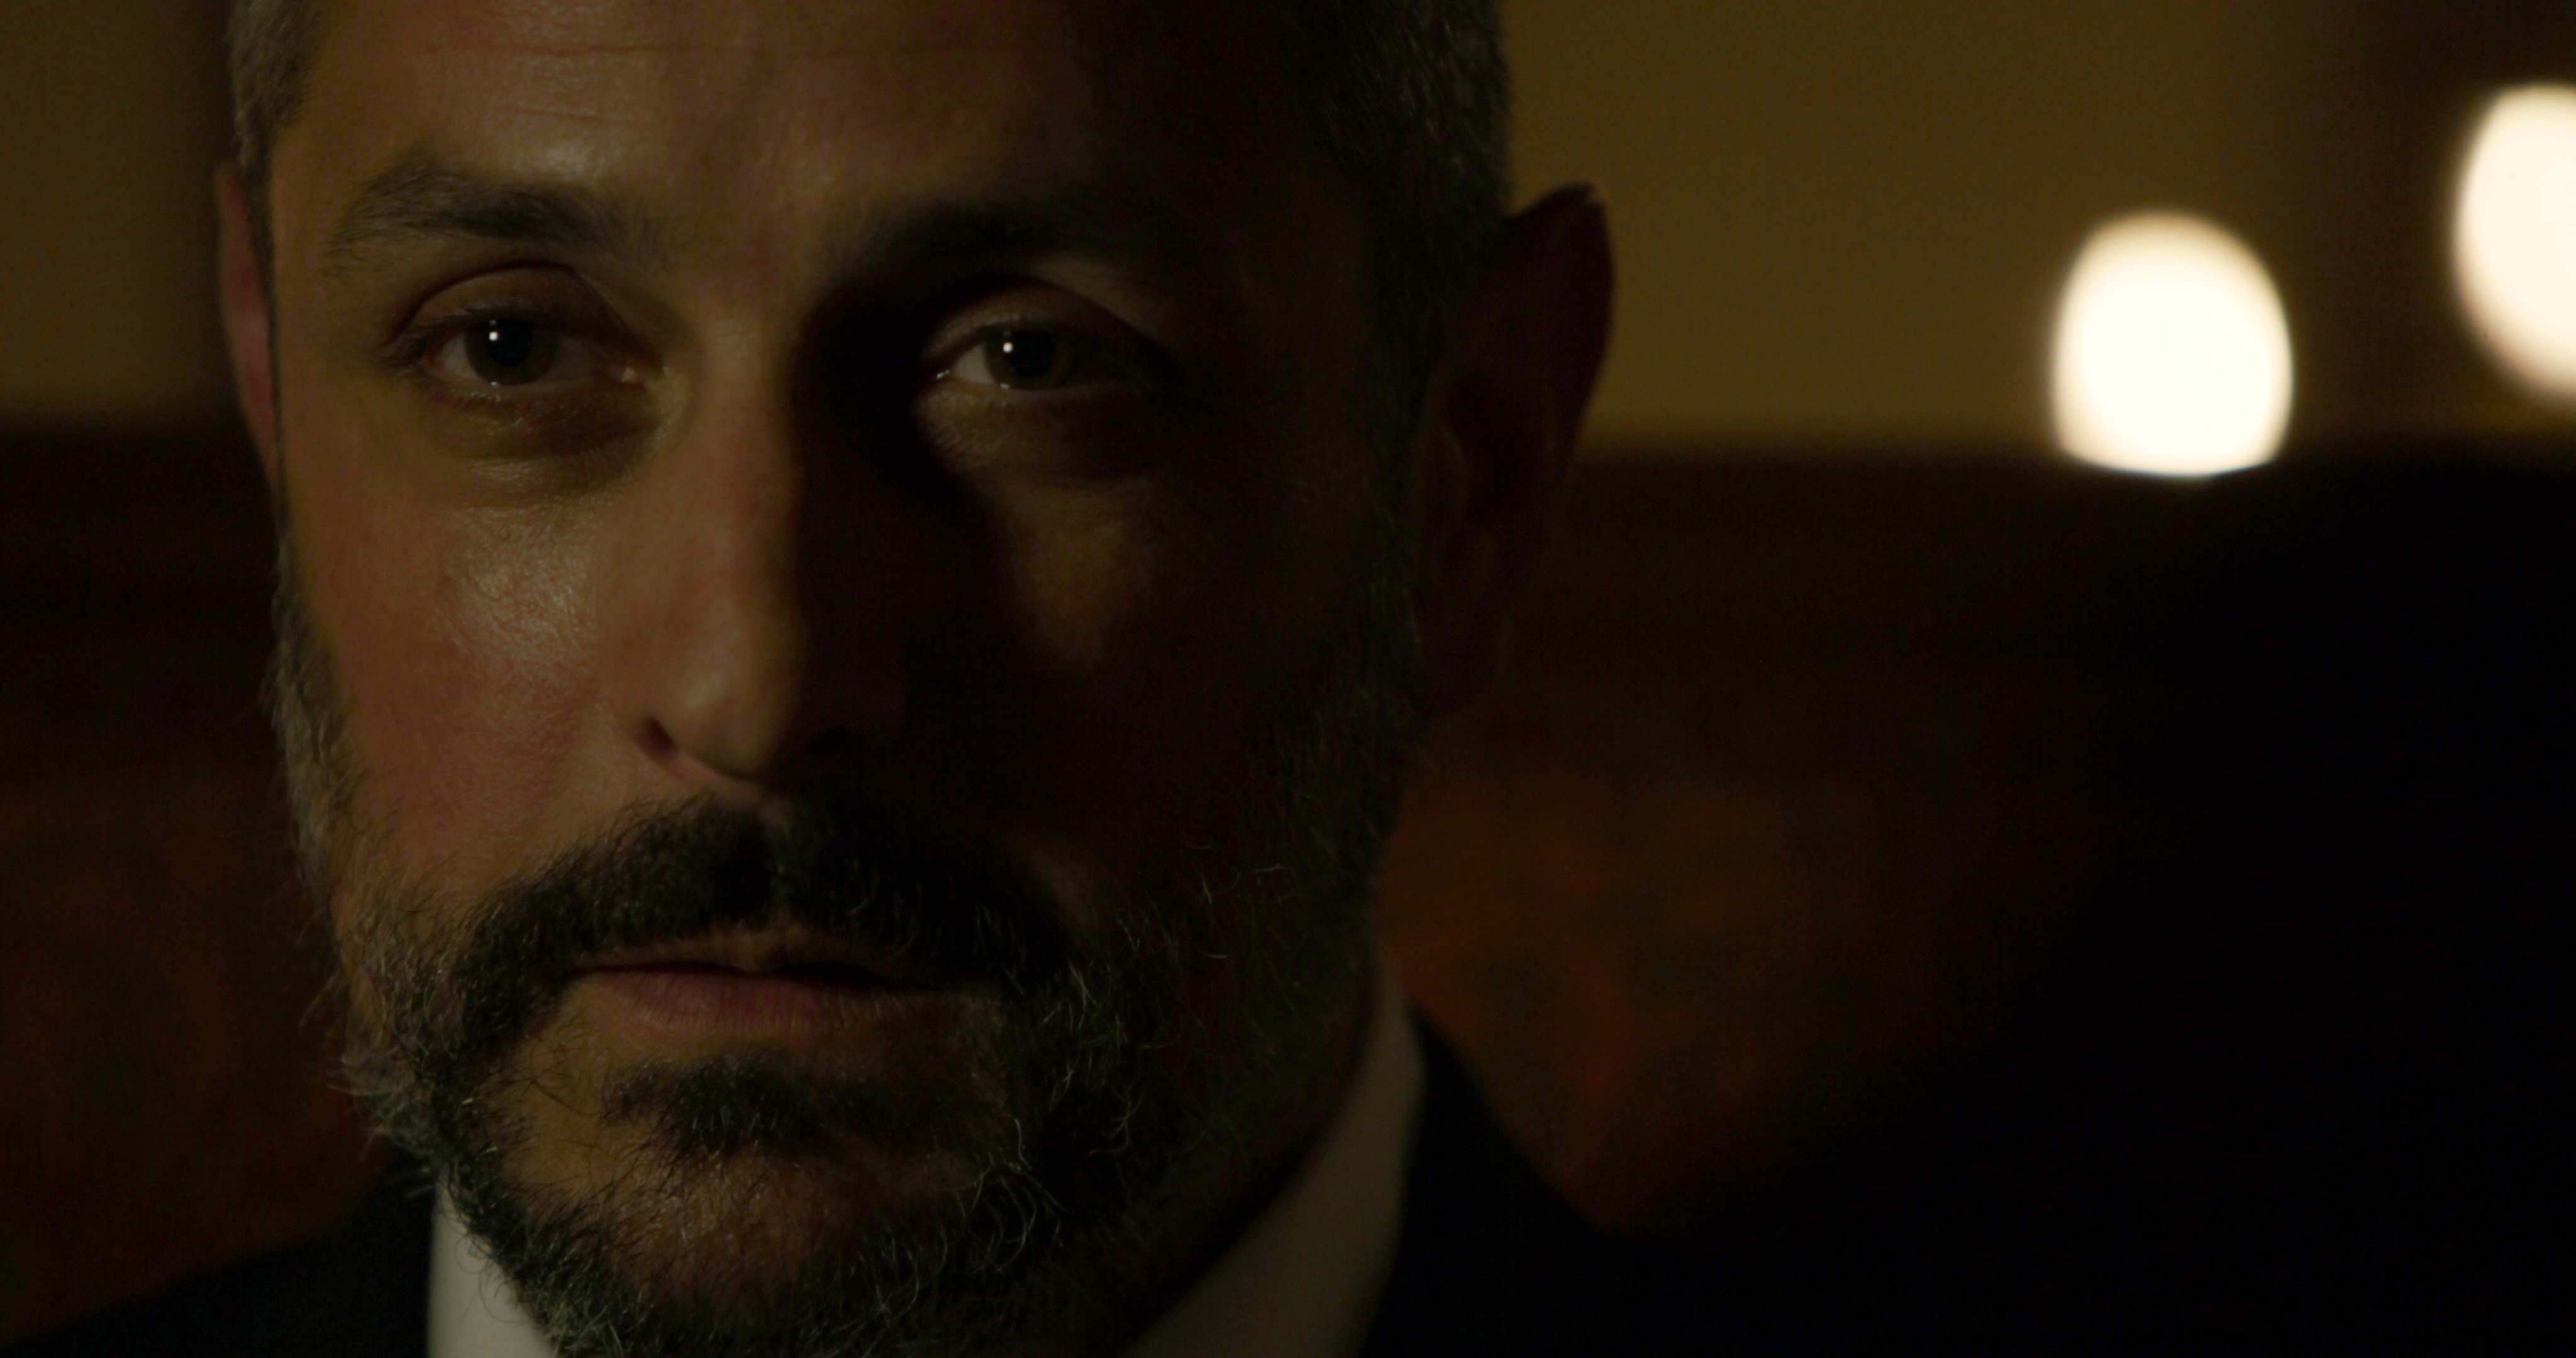 ASTORIA - Actor Theo Pagones as the Man.